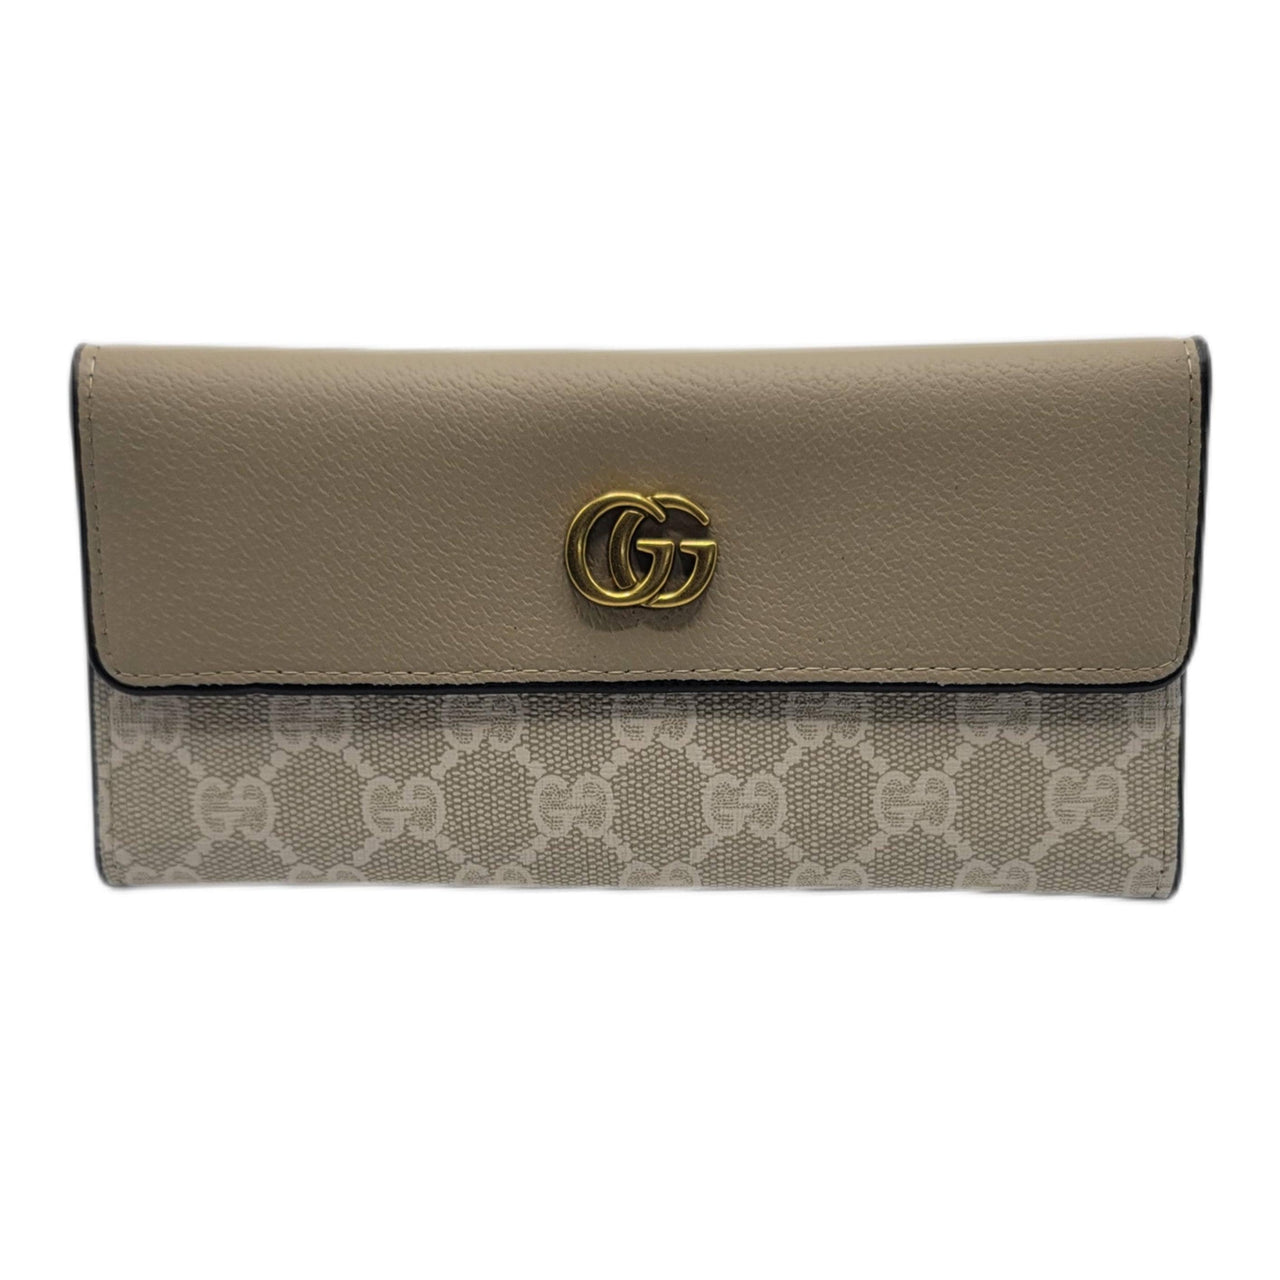 The Bag Couture Luggage & Bags Gucci 3 Fold Wallet Beige Centre